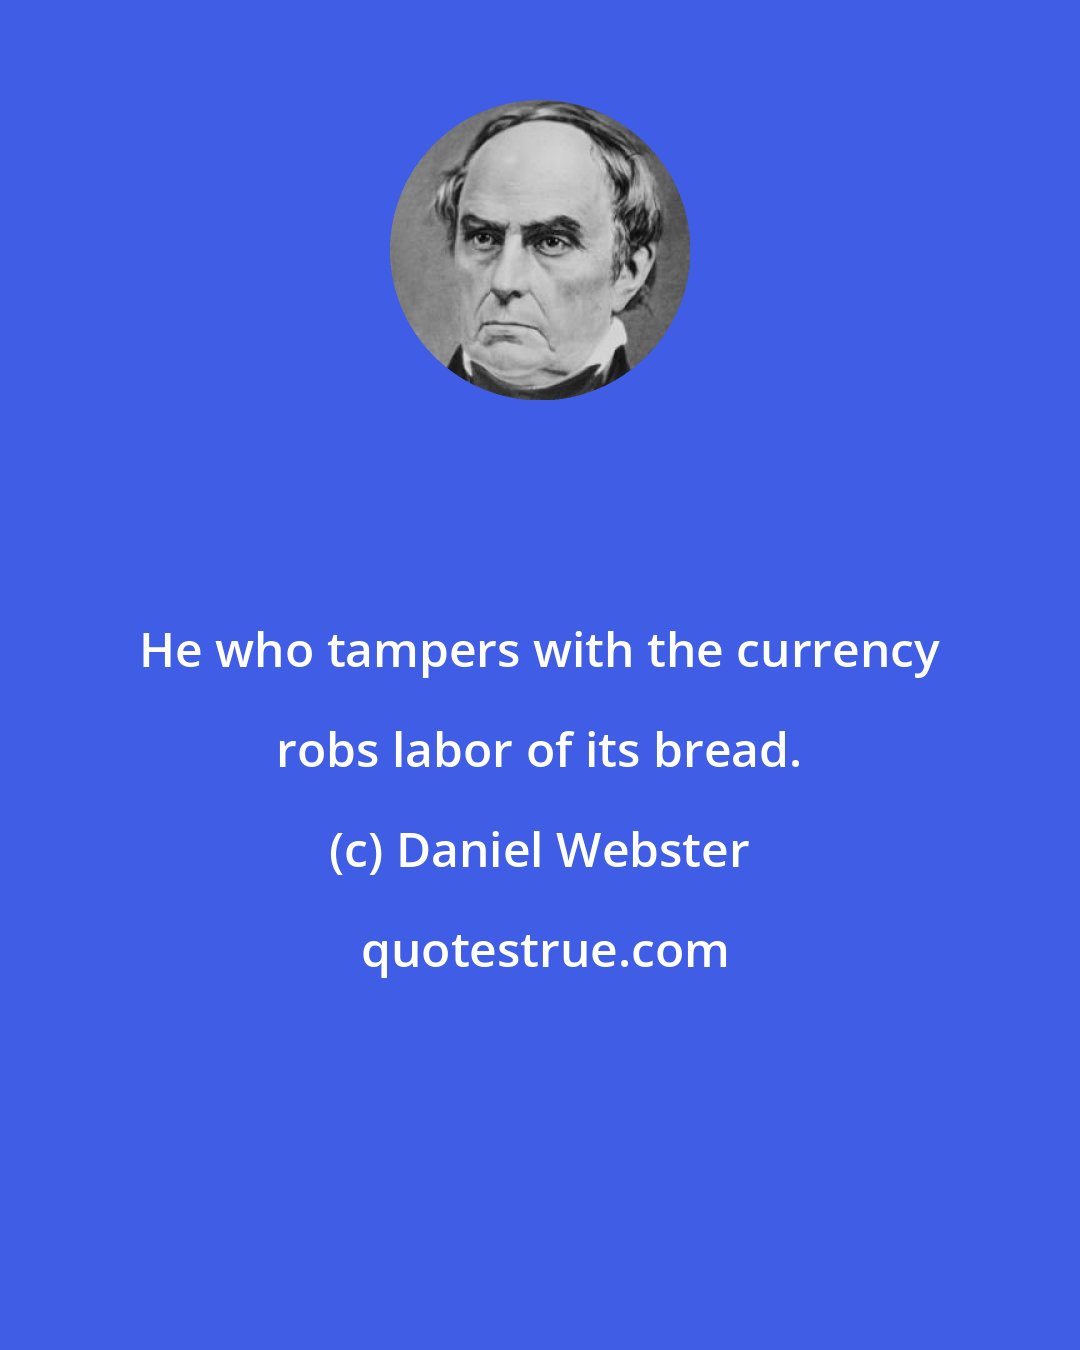 Daniel Webster: He who tampers with the currency robs labor of its bread.